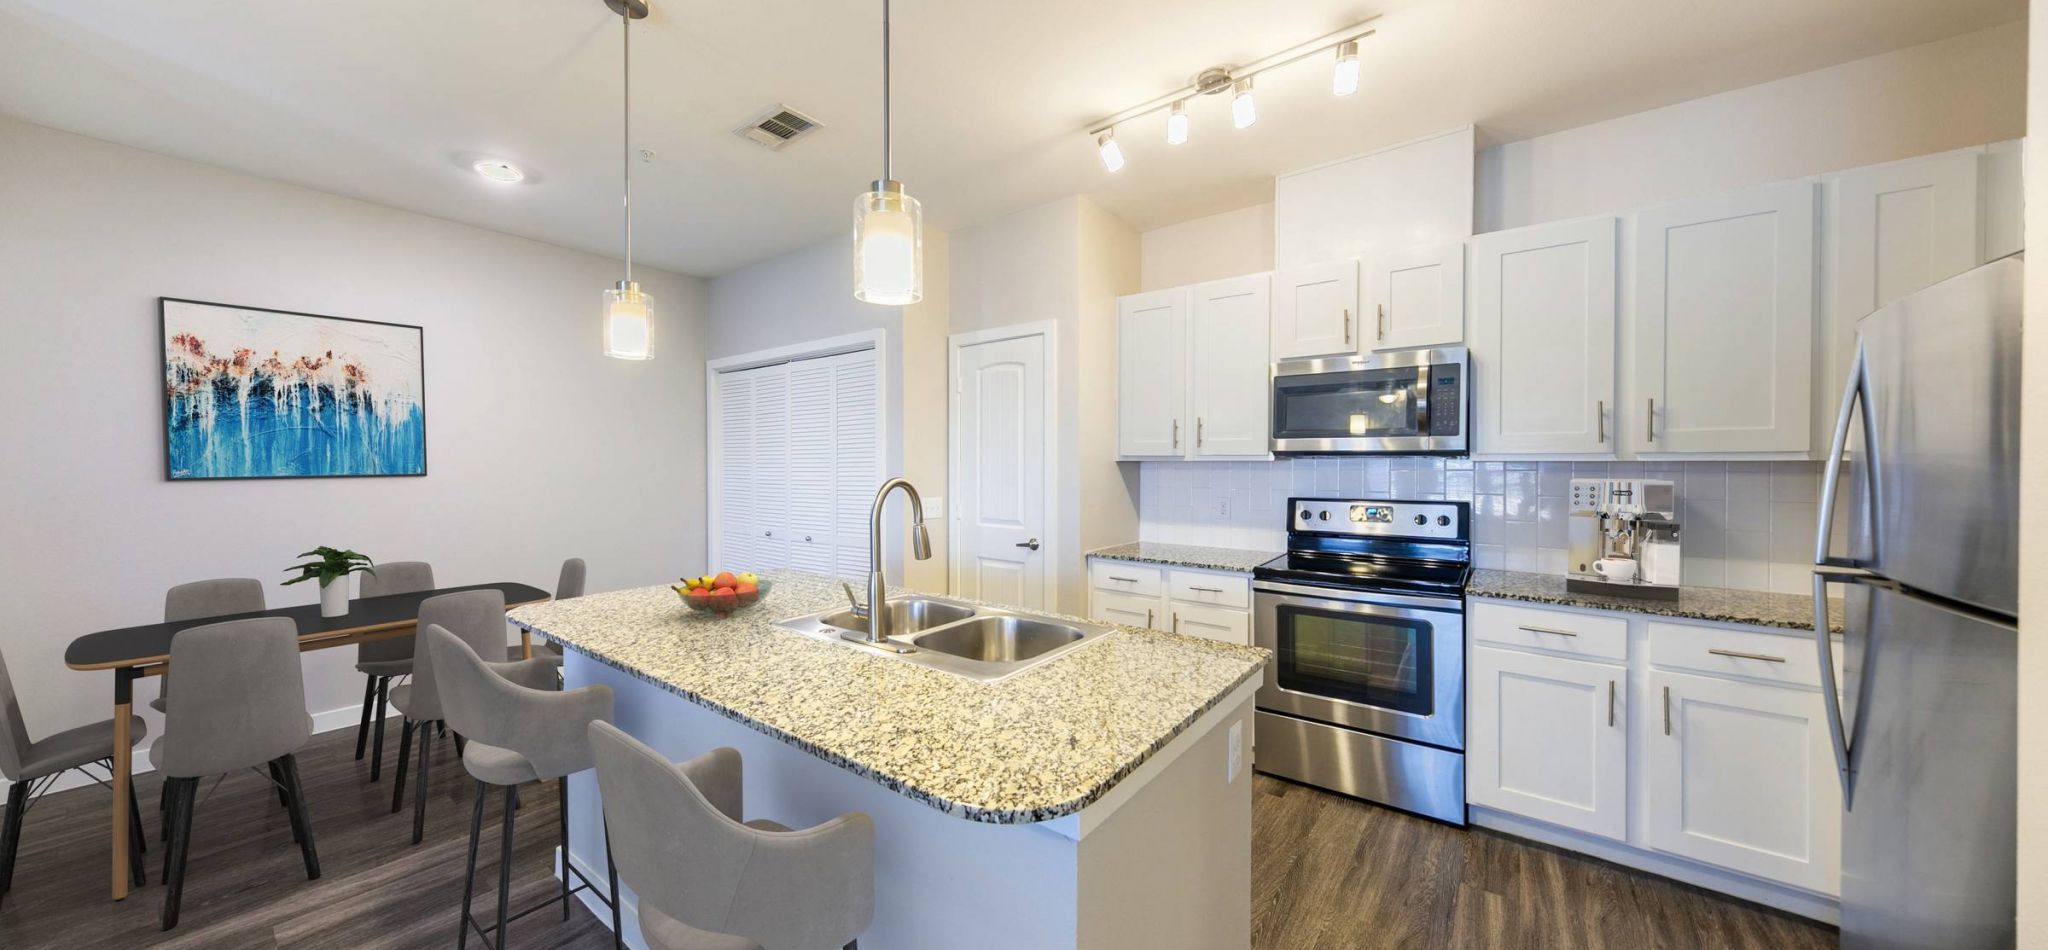 Hawthorne at Crenshaw modern apartment kitchen with kitchen island, granite countertops, stainless steel appliances, 9ft ceilings